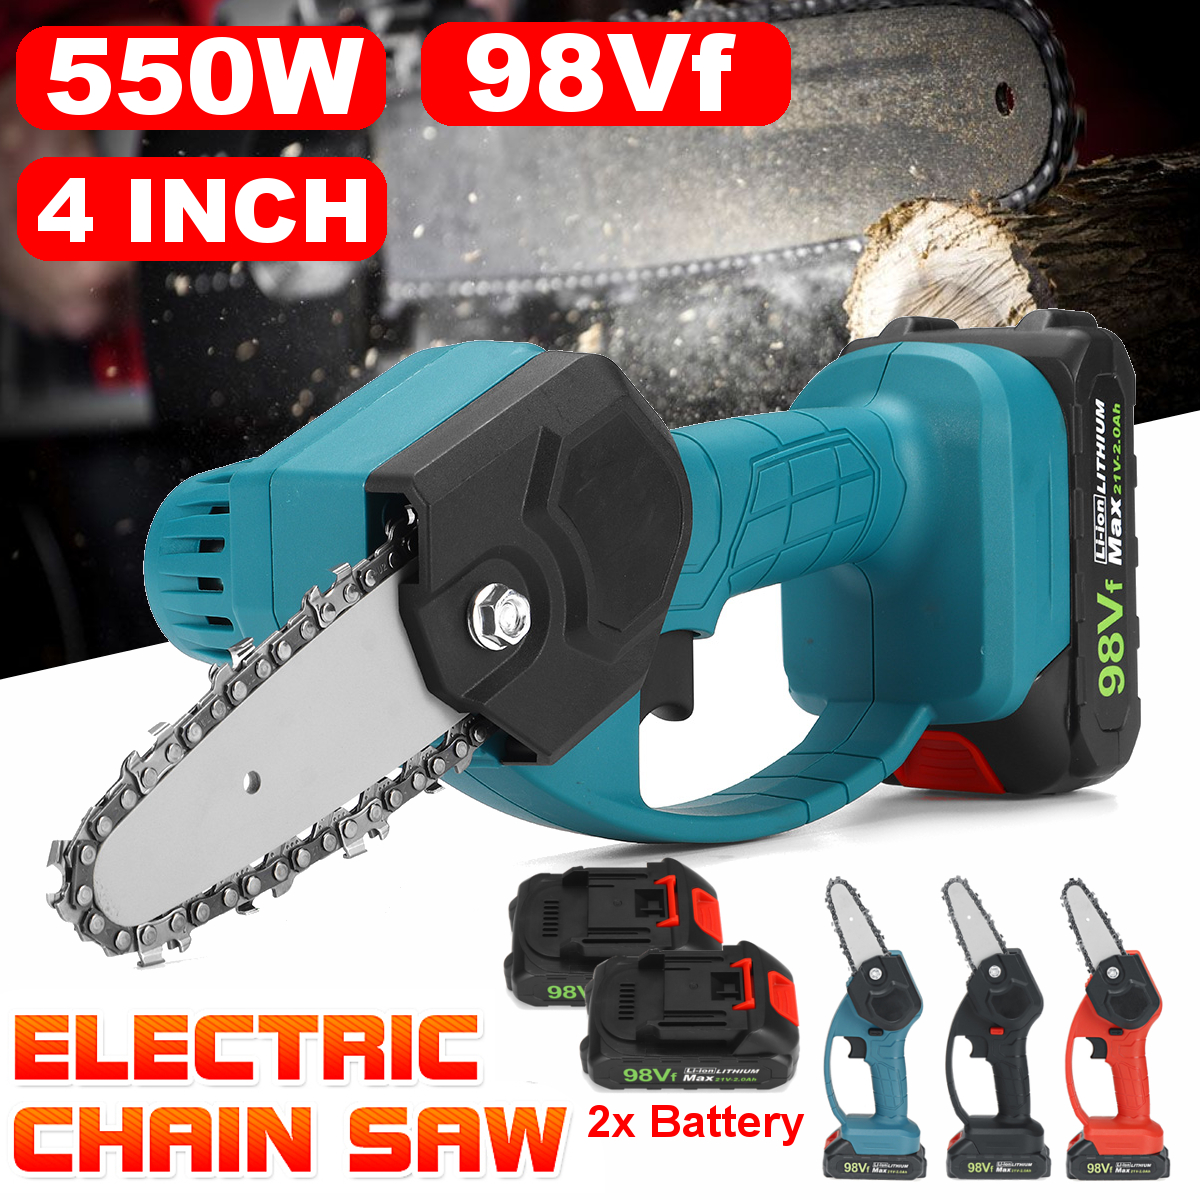 550W-21V-4inch-One-Hand-Woodworking-Electric-Chain-Saw-Wood-Cutter-Cordless-1807129-1